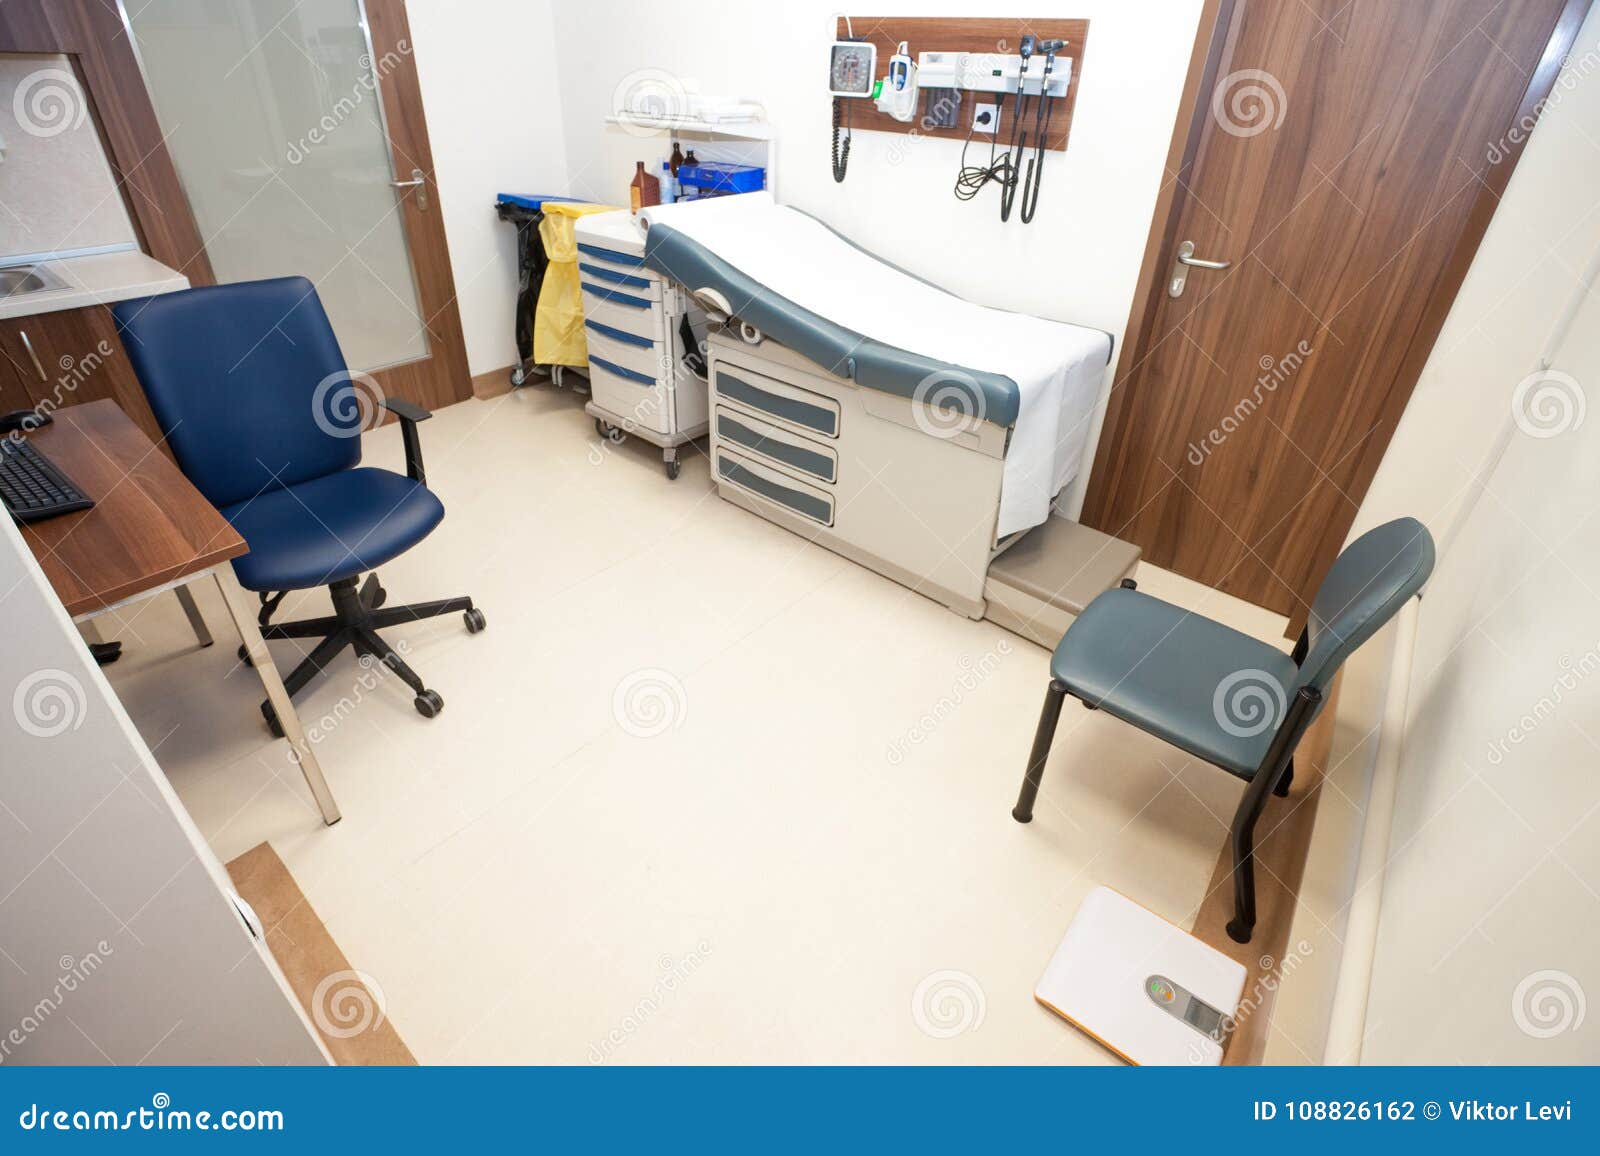 general practitioner office